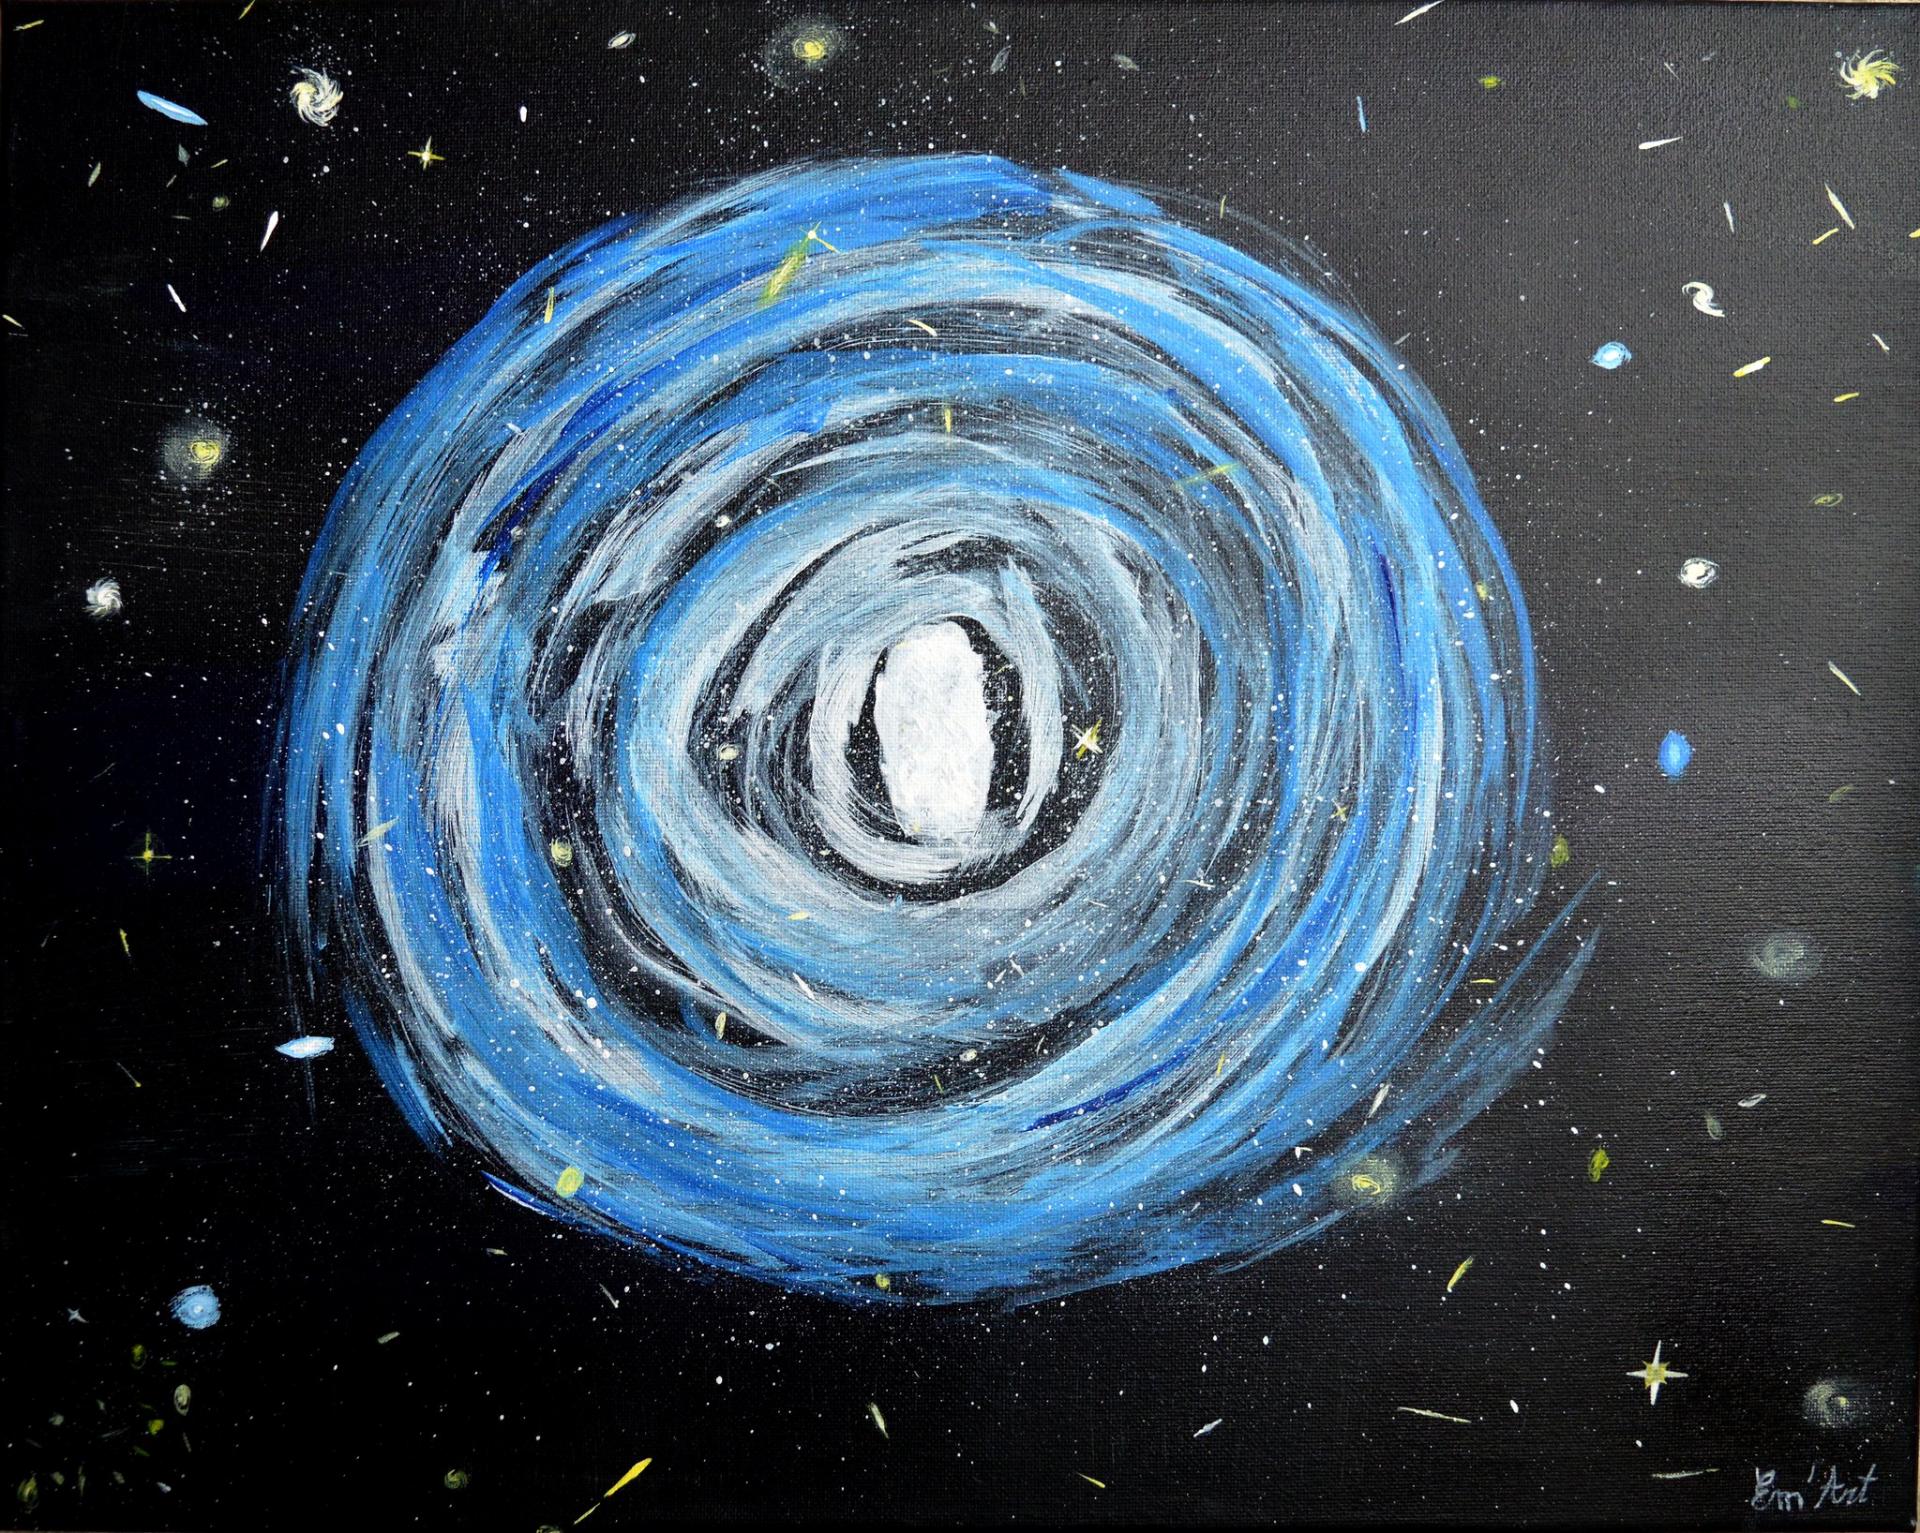 Cosmic Message, acrylic on canvas by Emmanuelle Baudry